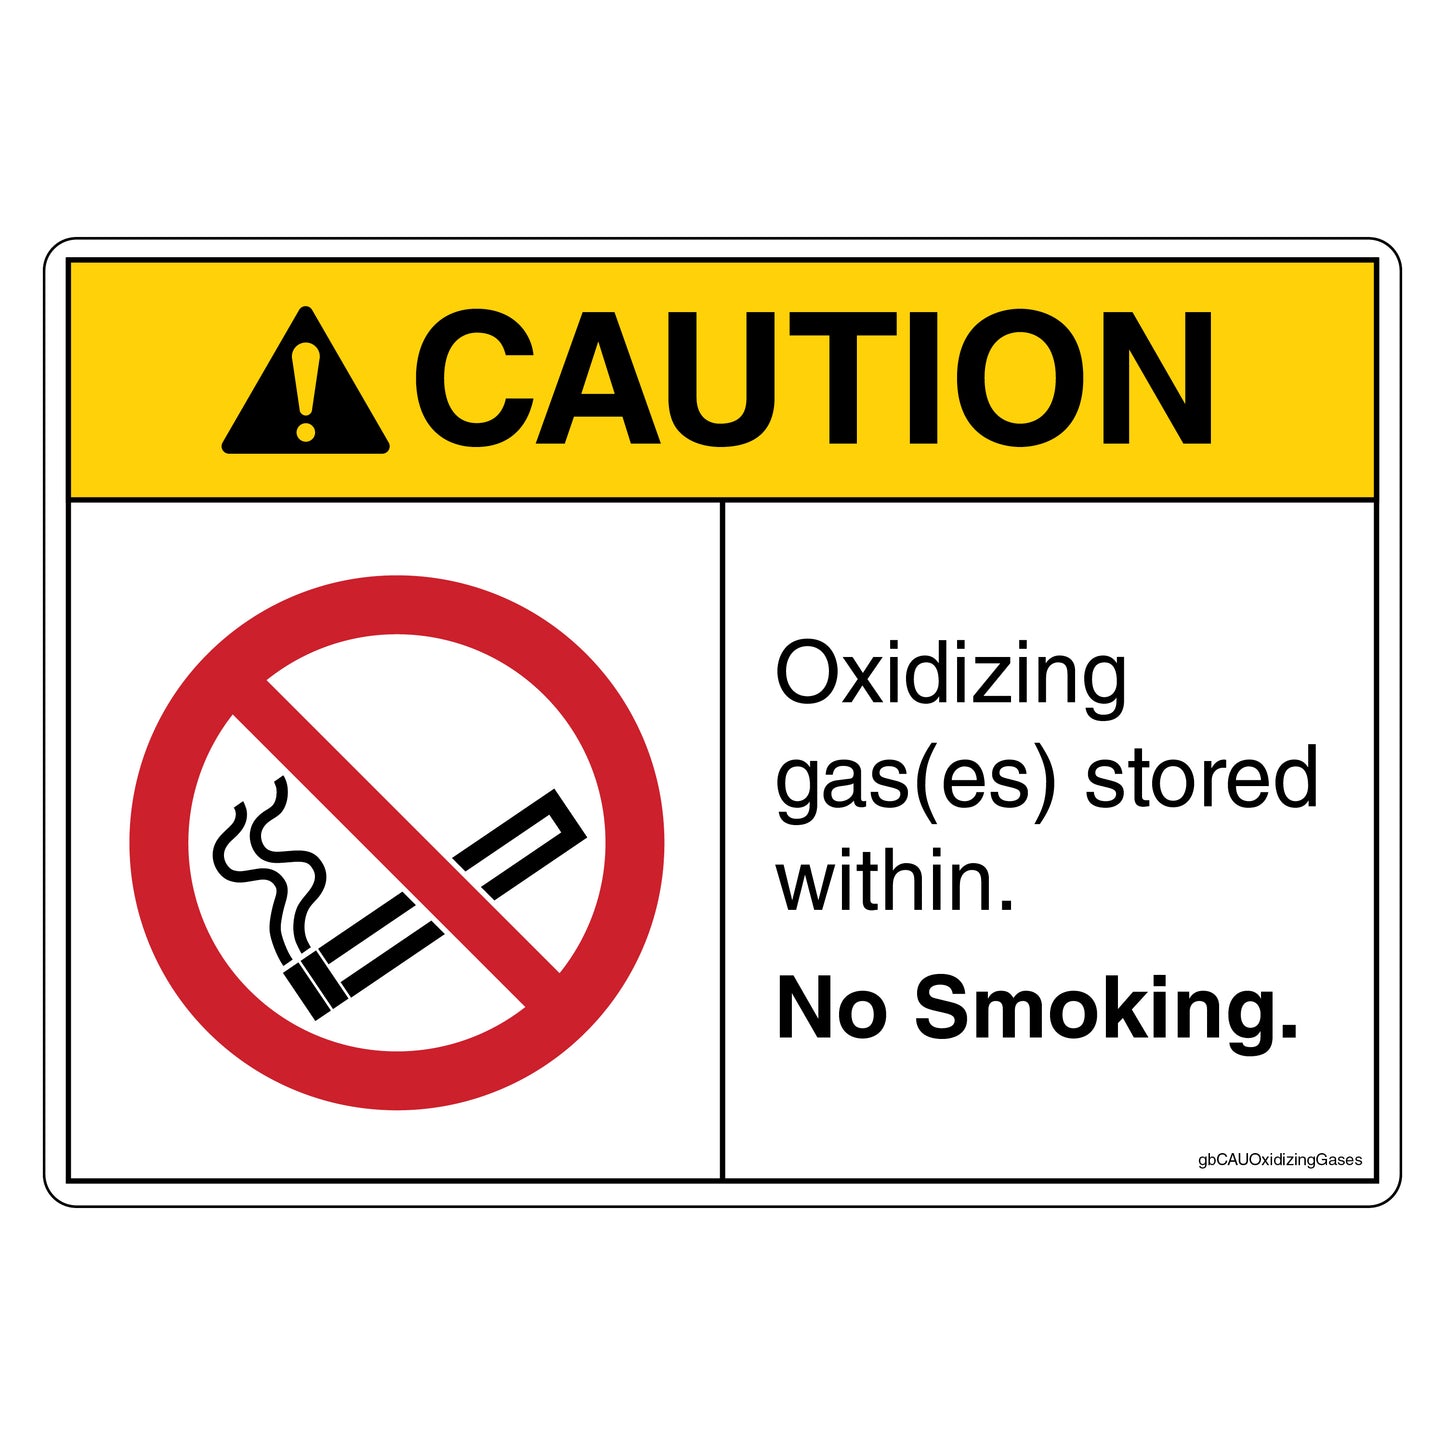 Caution Oxidizing Gas(es) Stored Within No Smoking Decal.